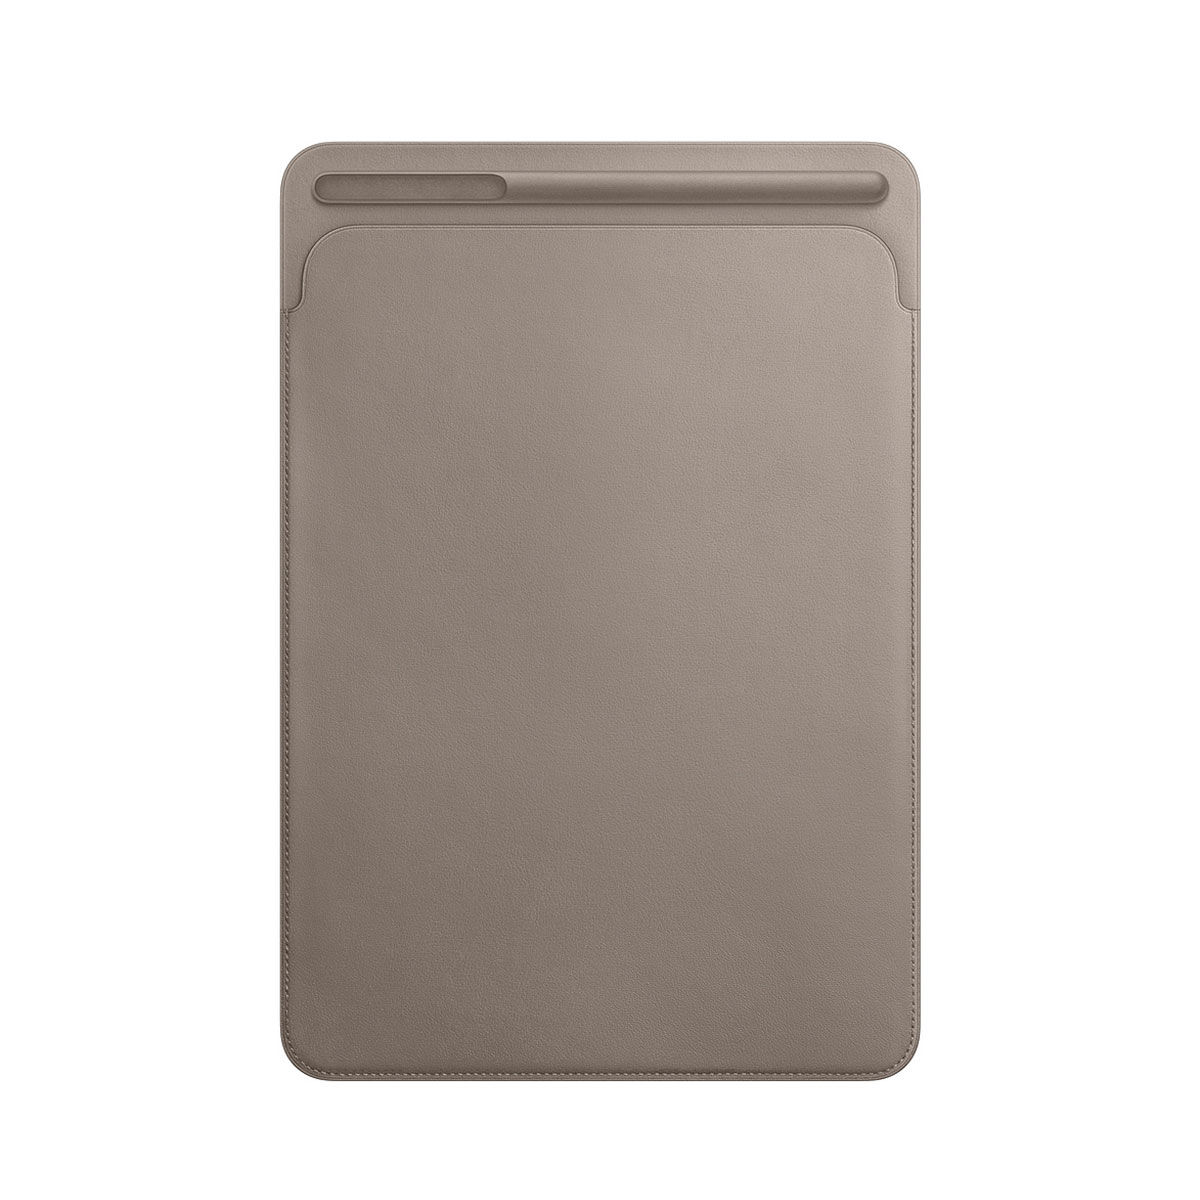 Apple Leather Sleeve for 10.5‑inch iPad Pro - Taupe